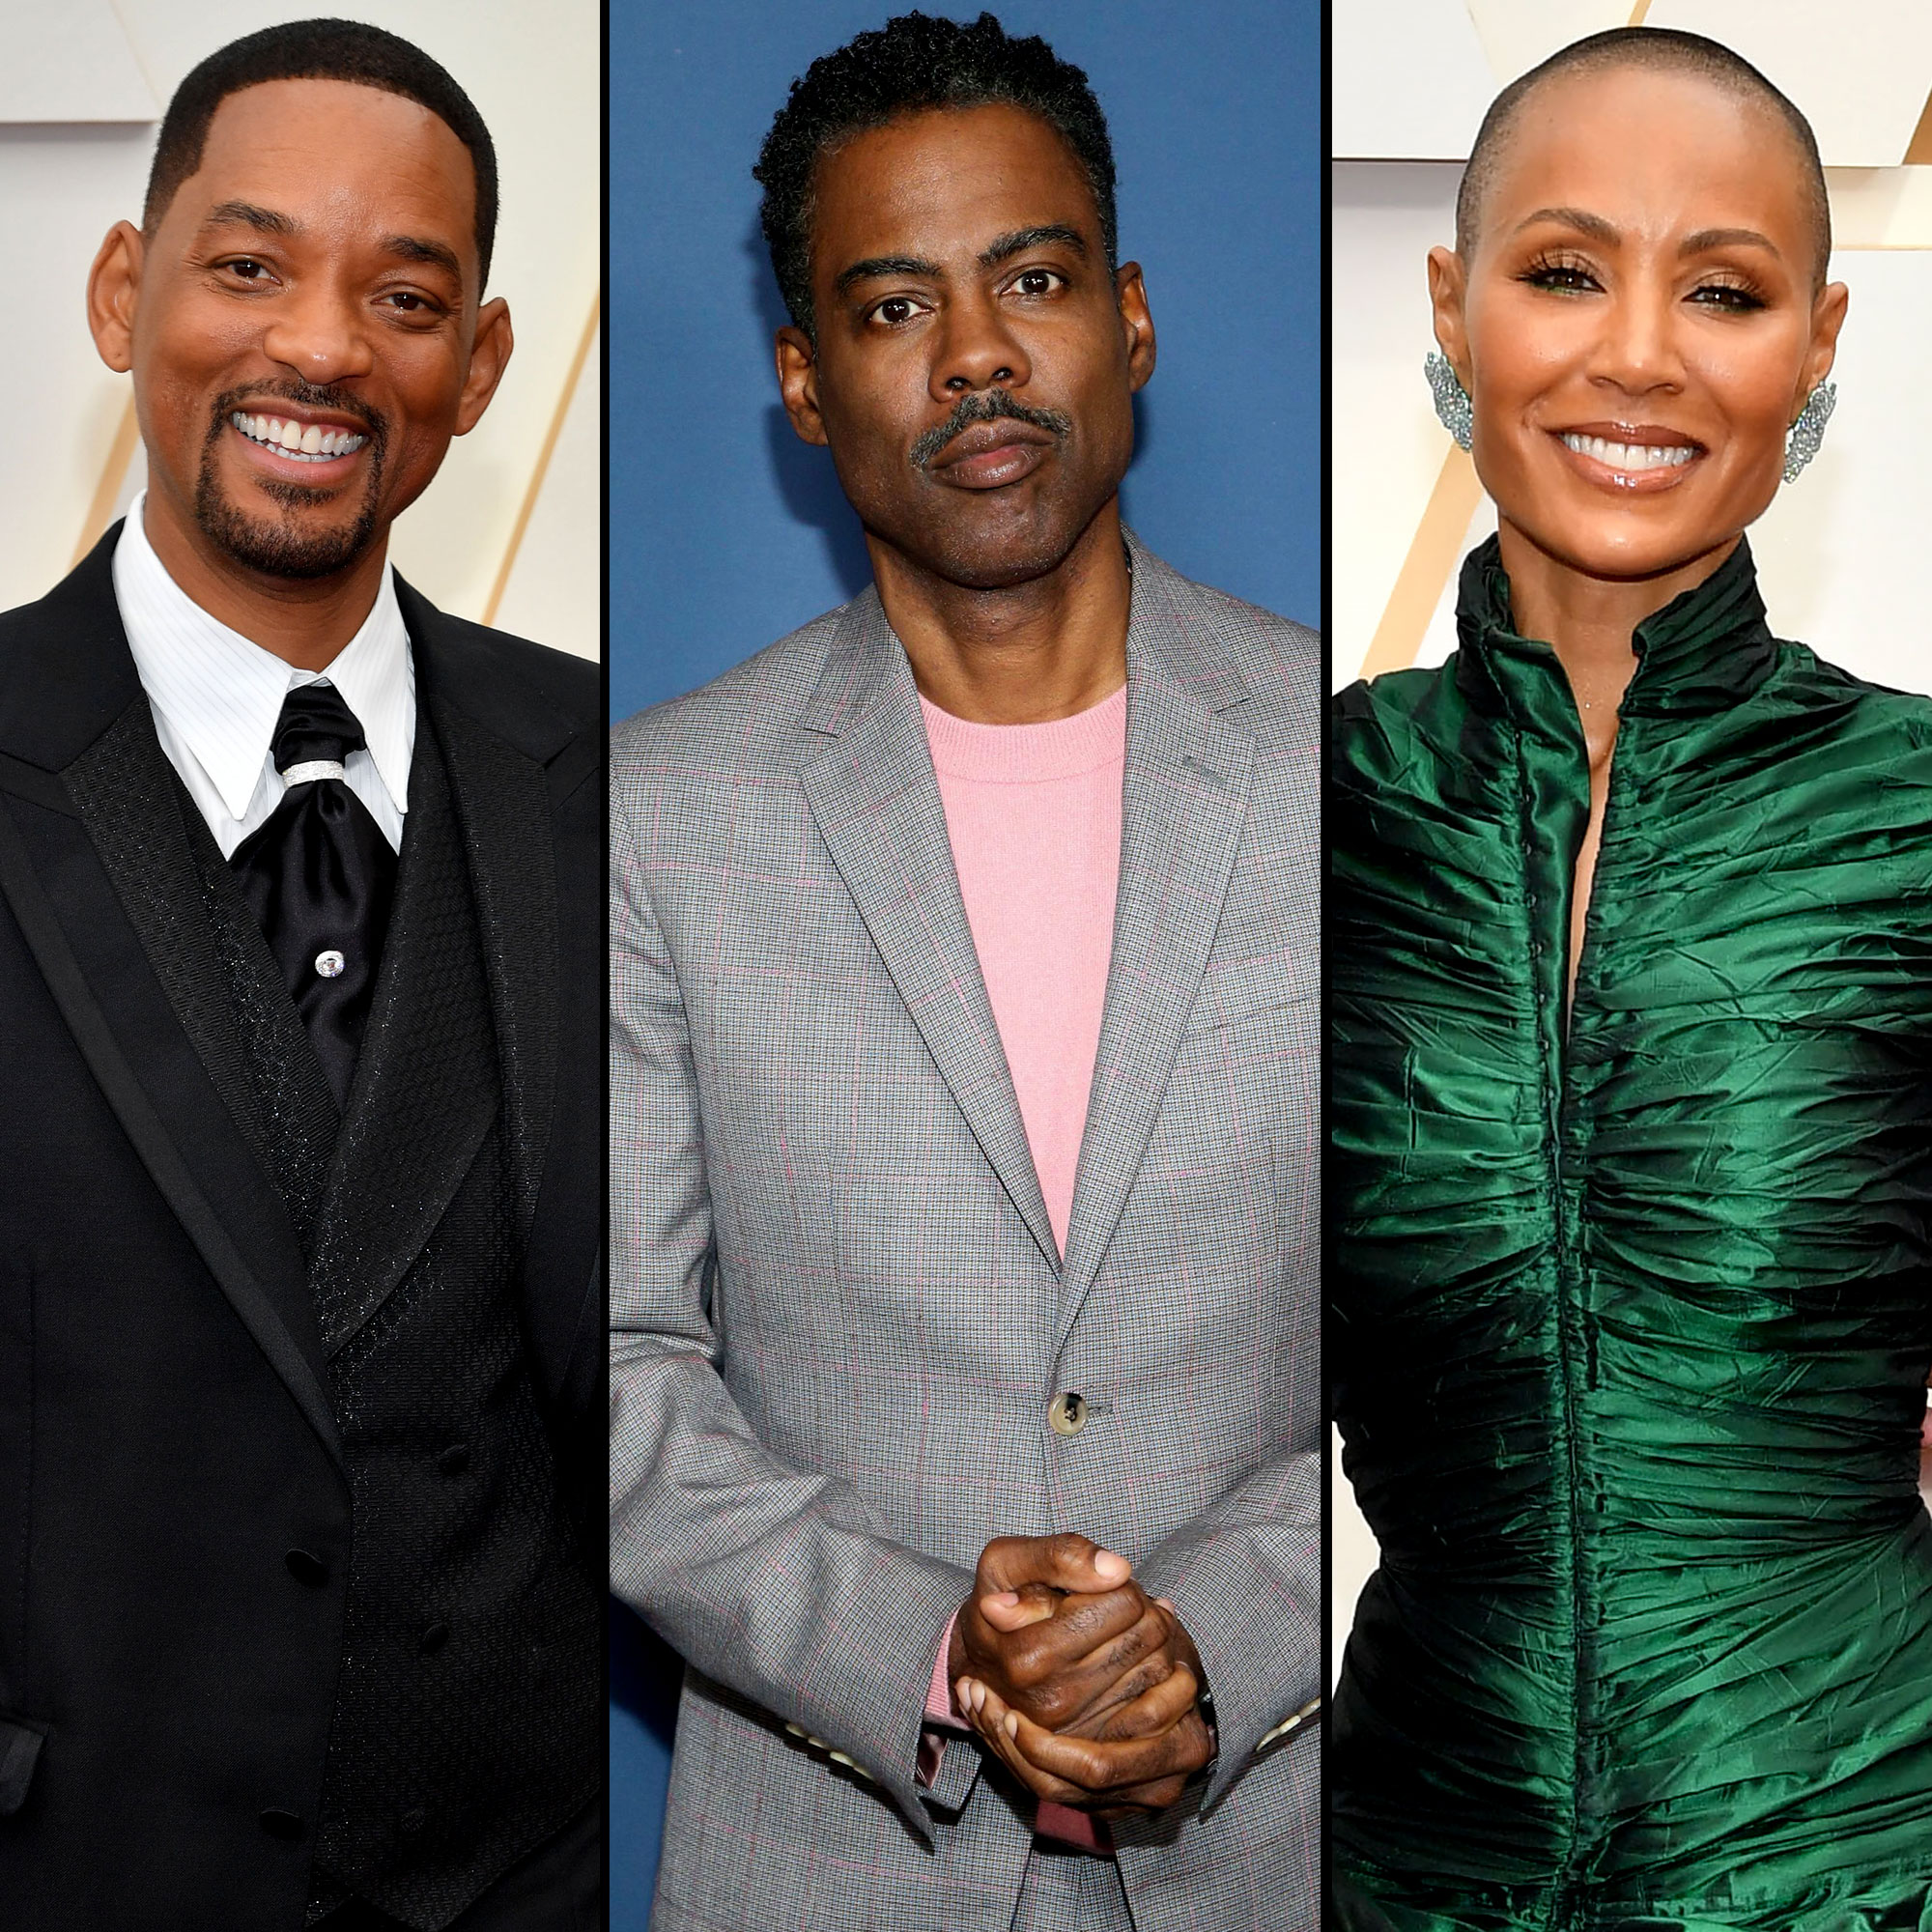 Will Smith and Chris Rock's Oscars 2022 Incident: Everything to Know